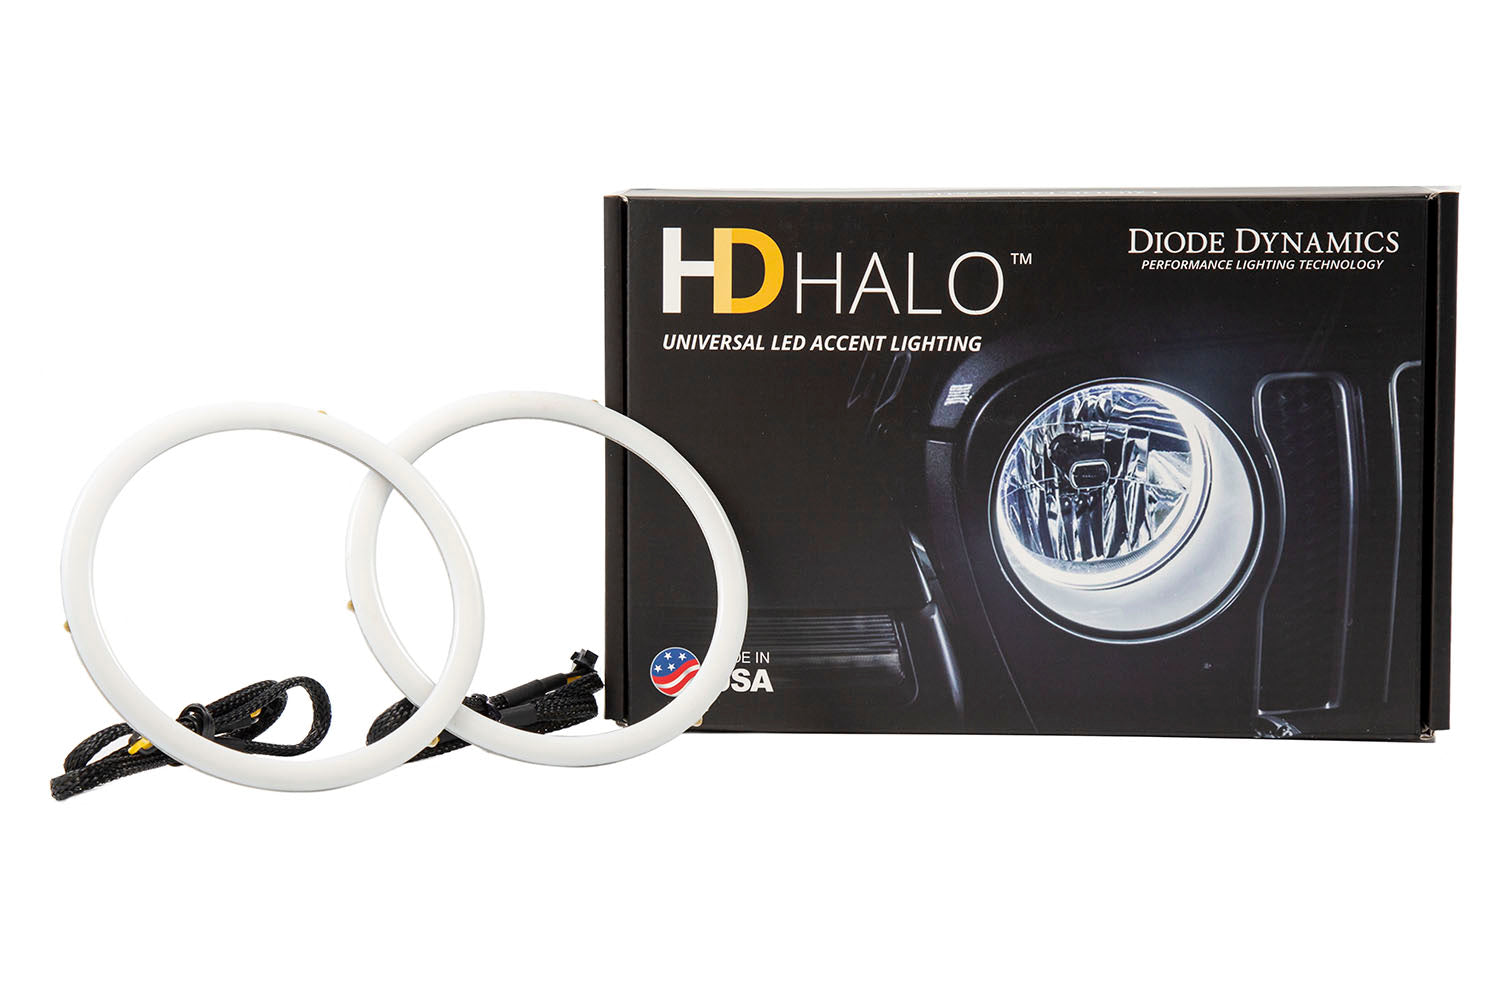 Halo Lights LED 50mm Amber Pair Diode Dynamics